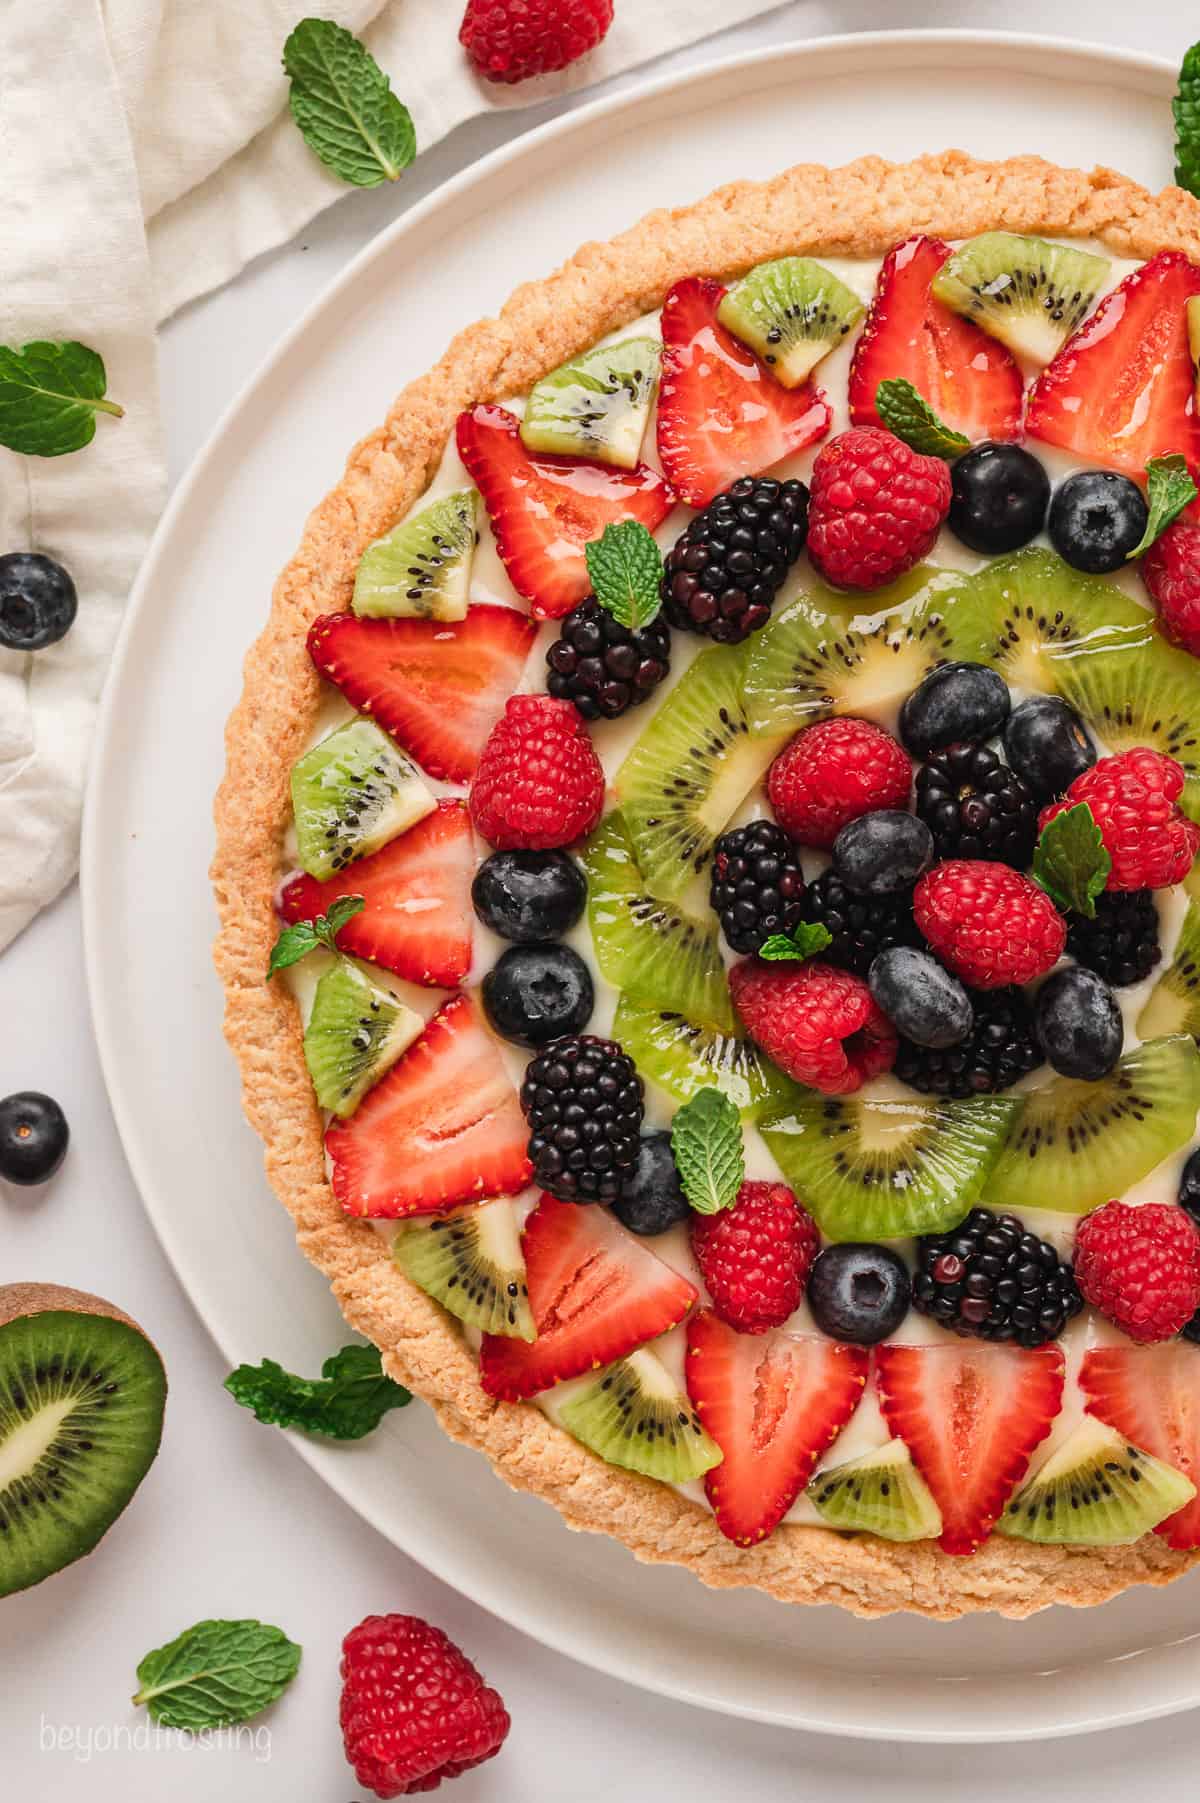 Overhead close up view of a fruit tart surrounded by scattered fresh fruit.